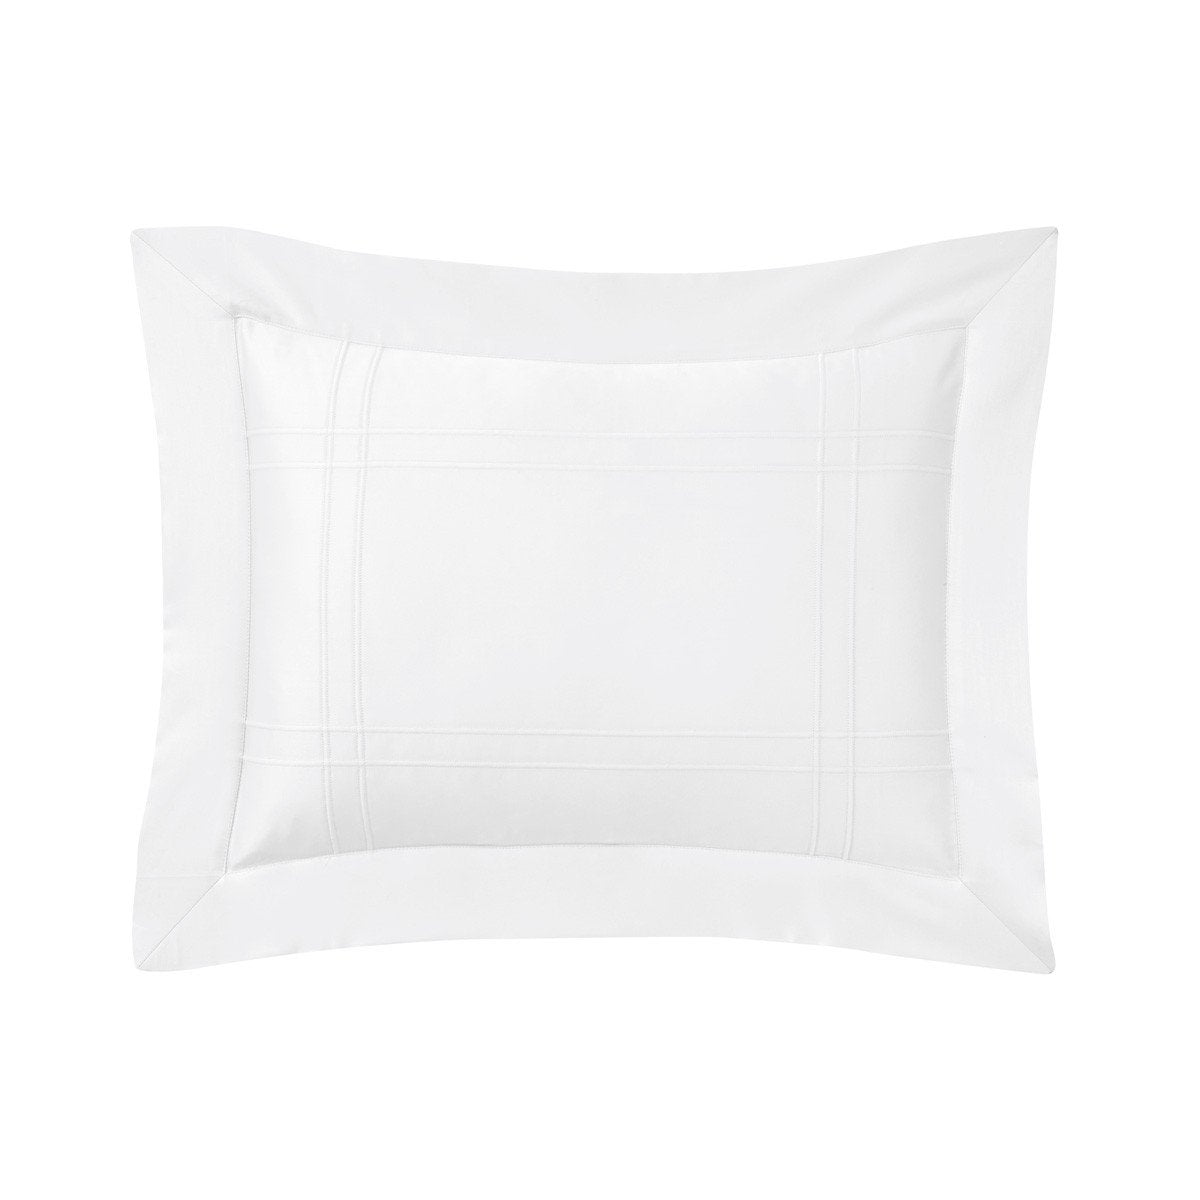 Adagio Blanc Bedding Collection by Yves Delorme | Fig Linens - White, cotton, boudoir sham